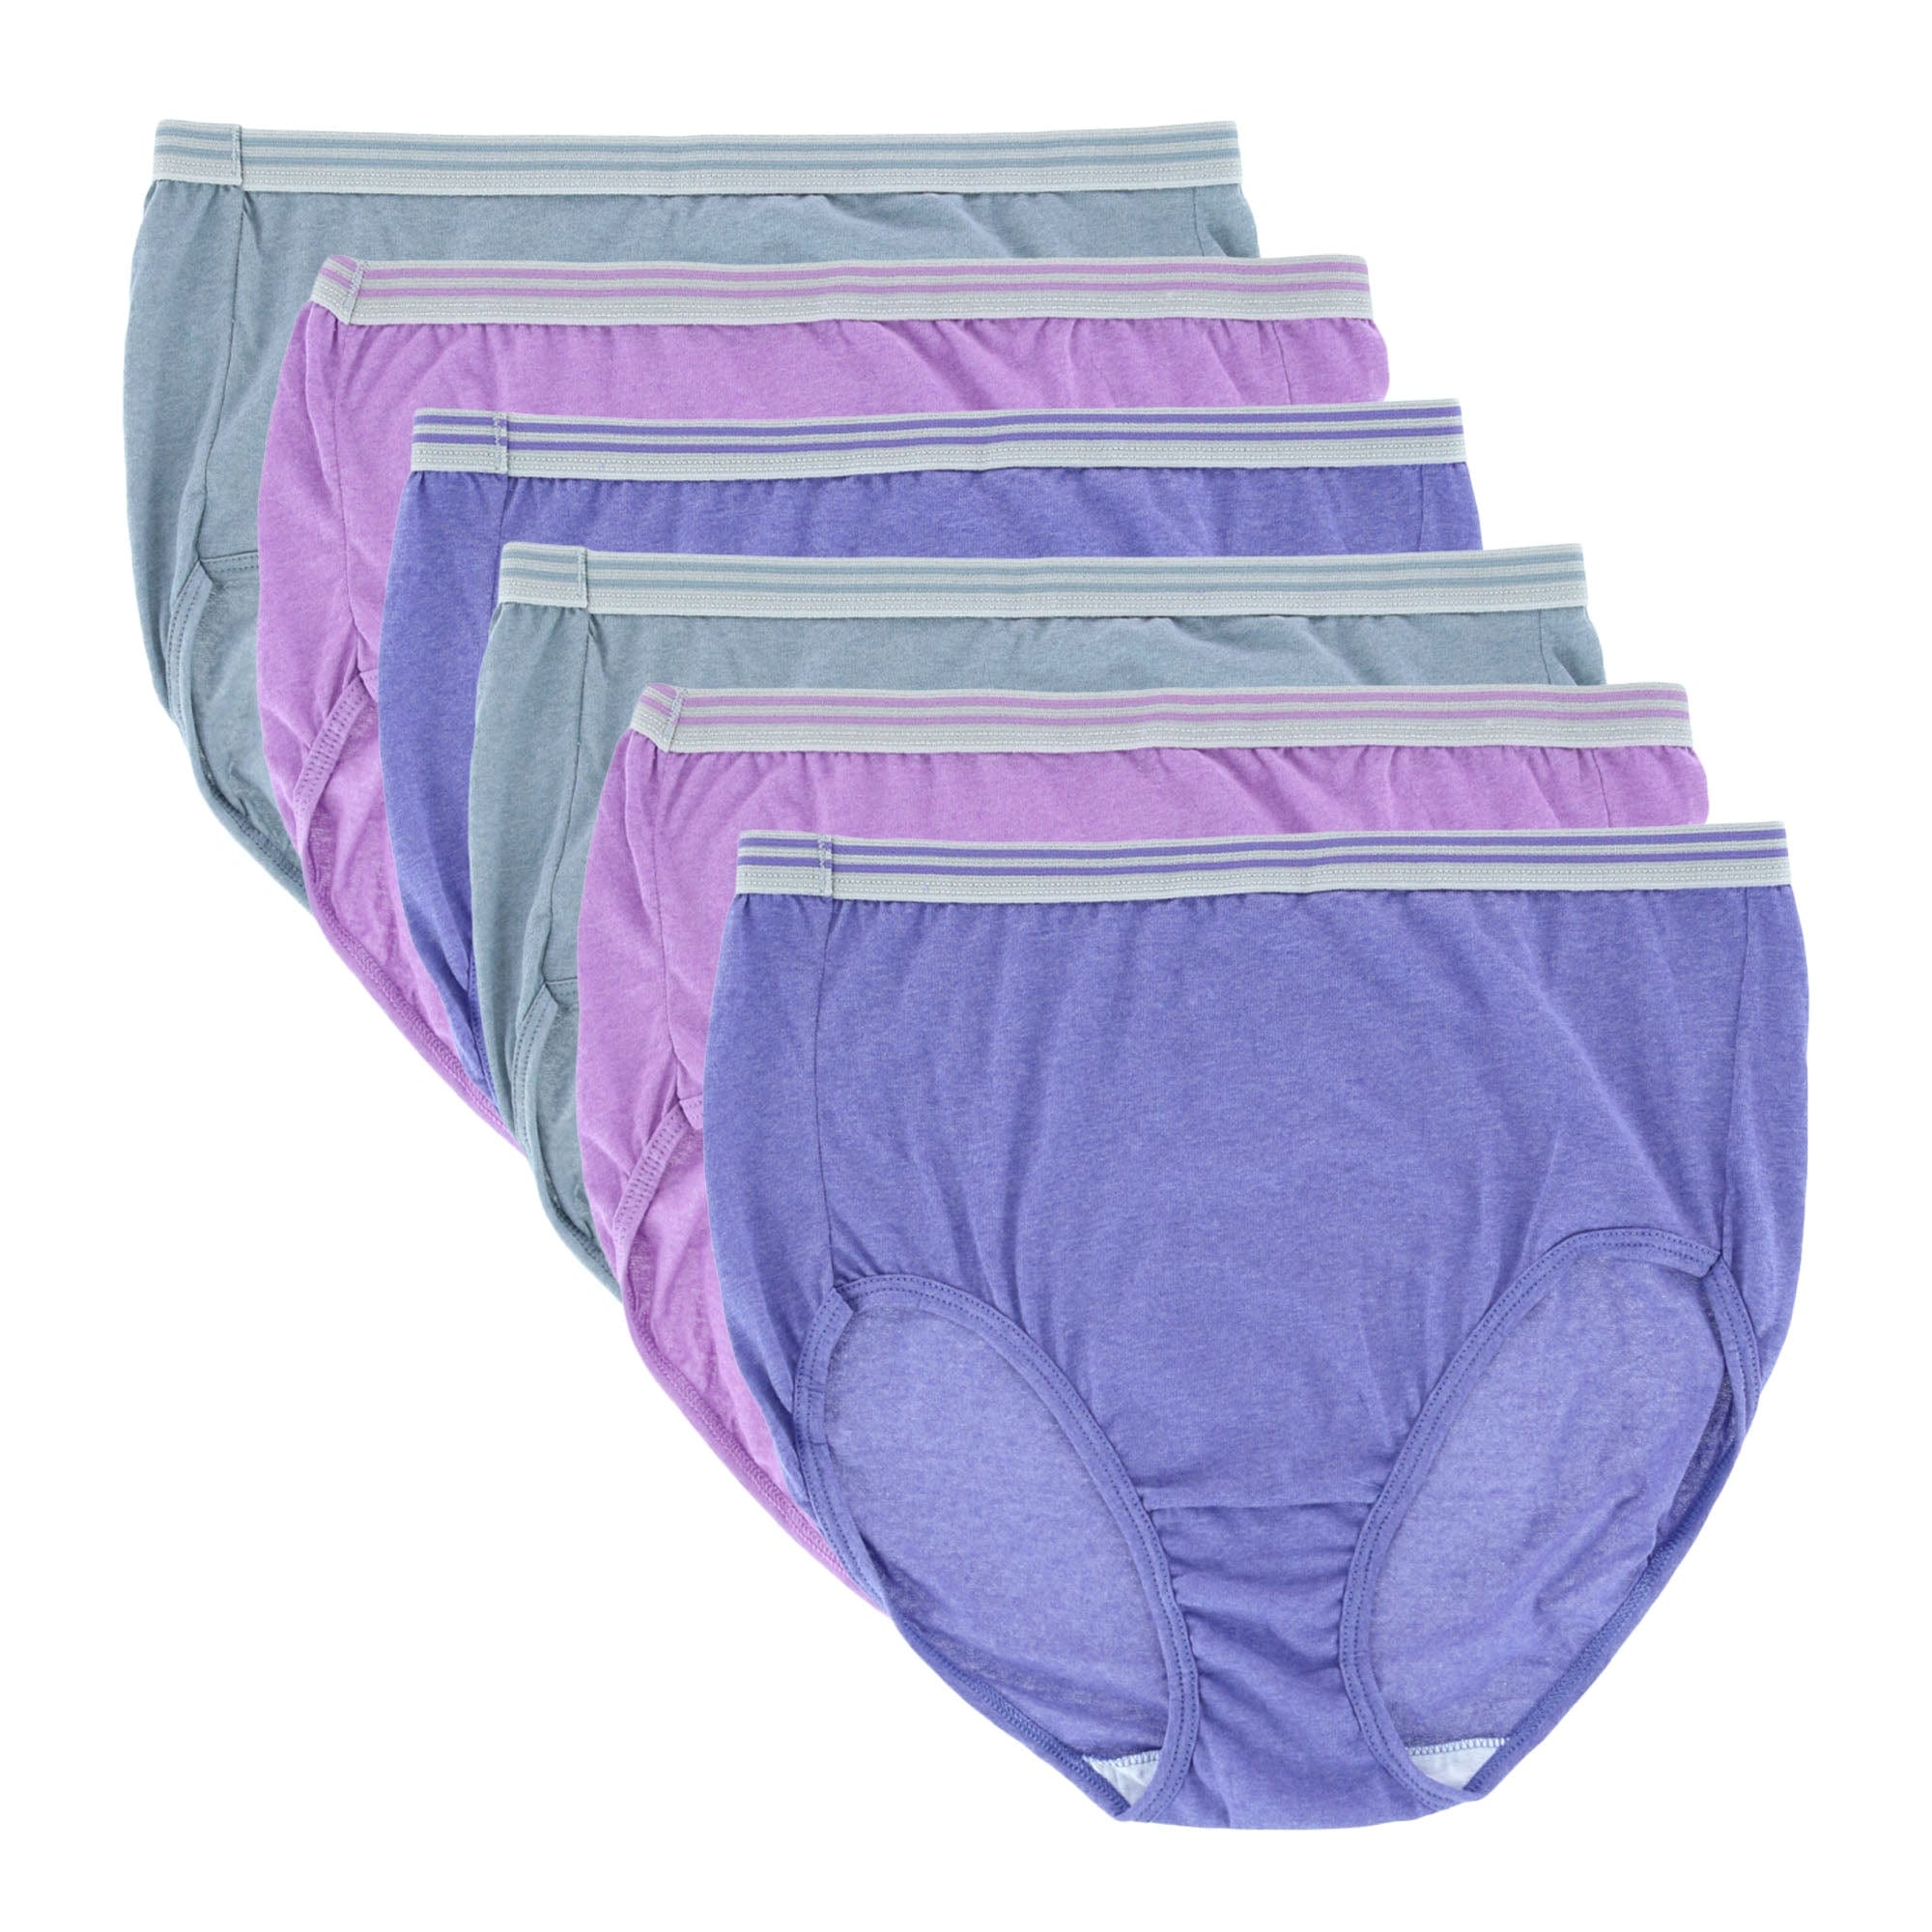 Women's Plus Size Fit For Me Brief Underwear (6 Pack) by Fruit of the Loom